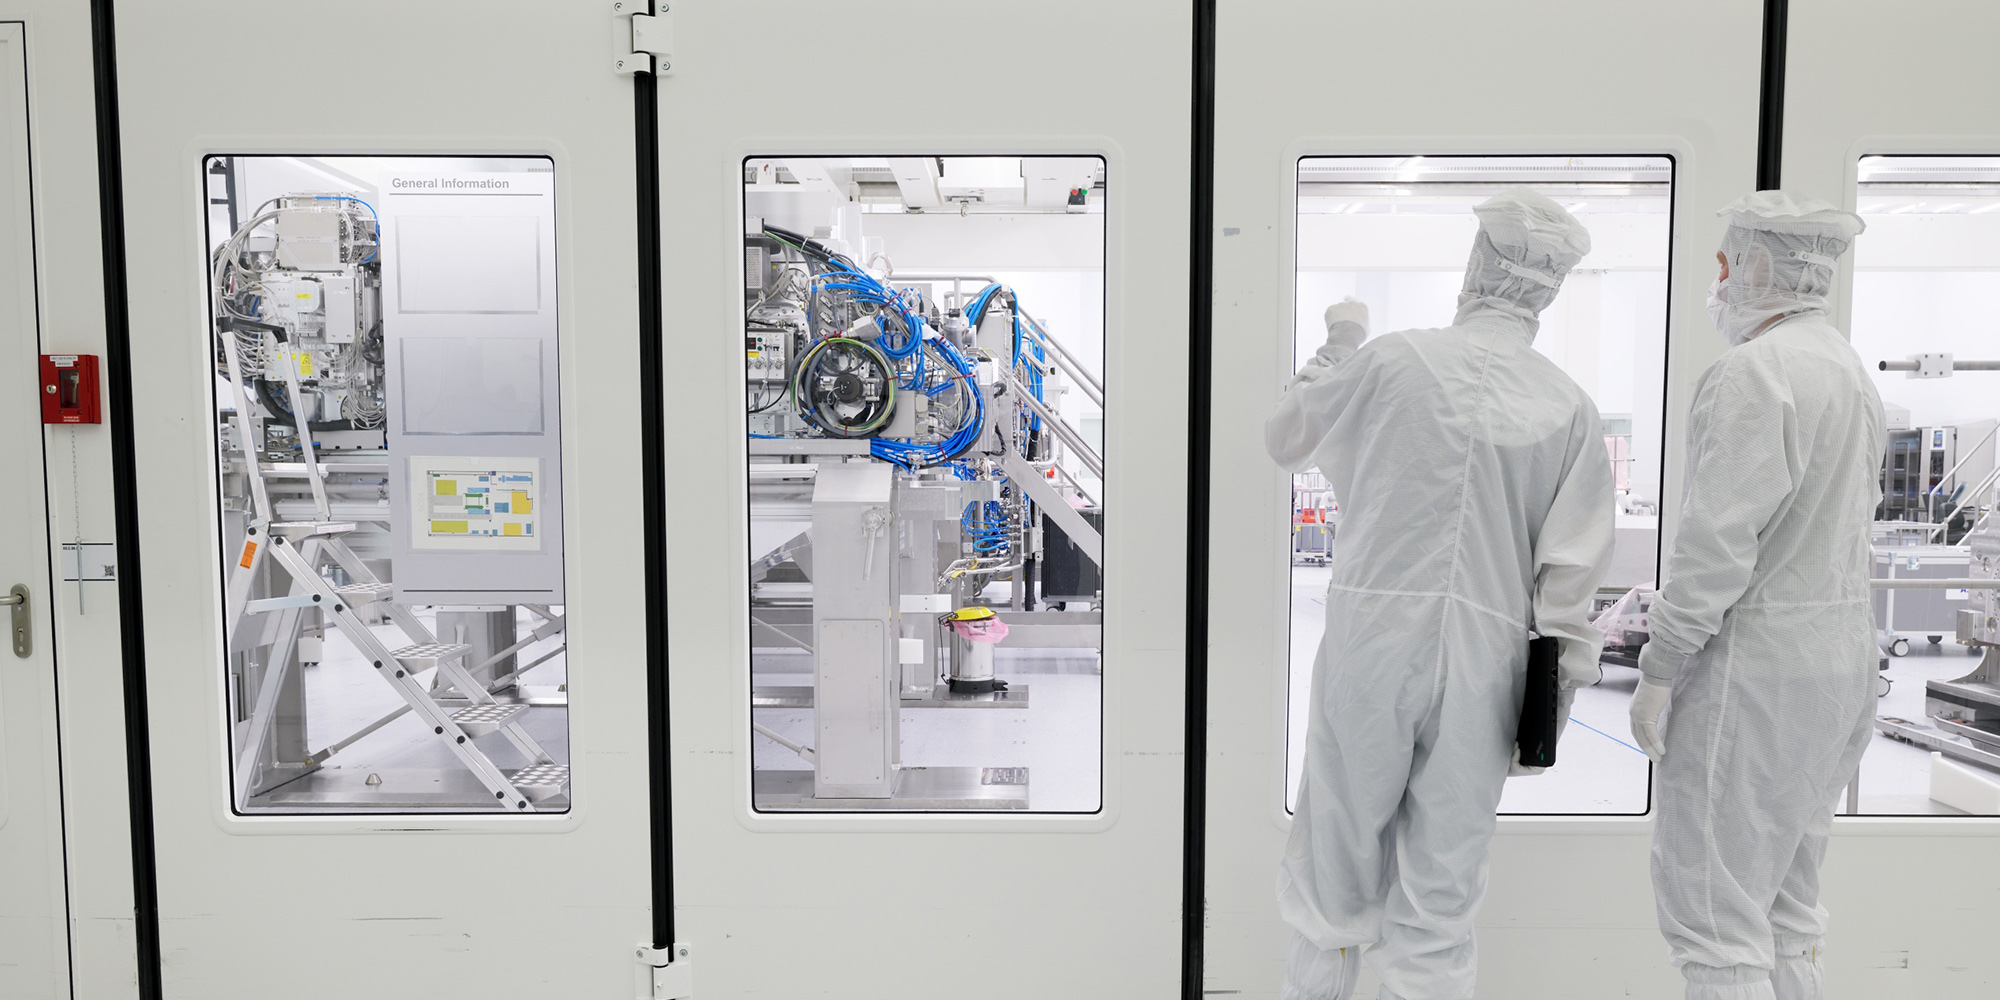 Two Engineers preparing to service a clean room